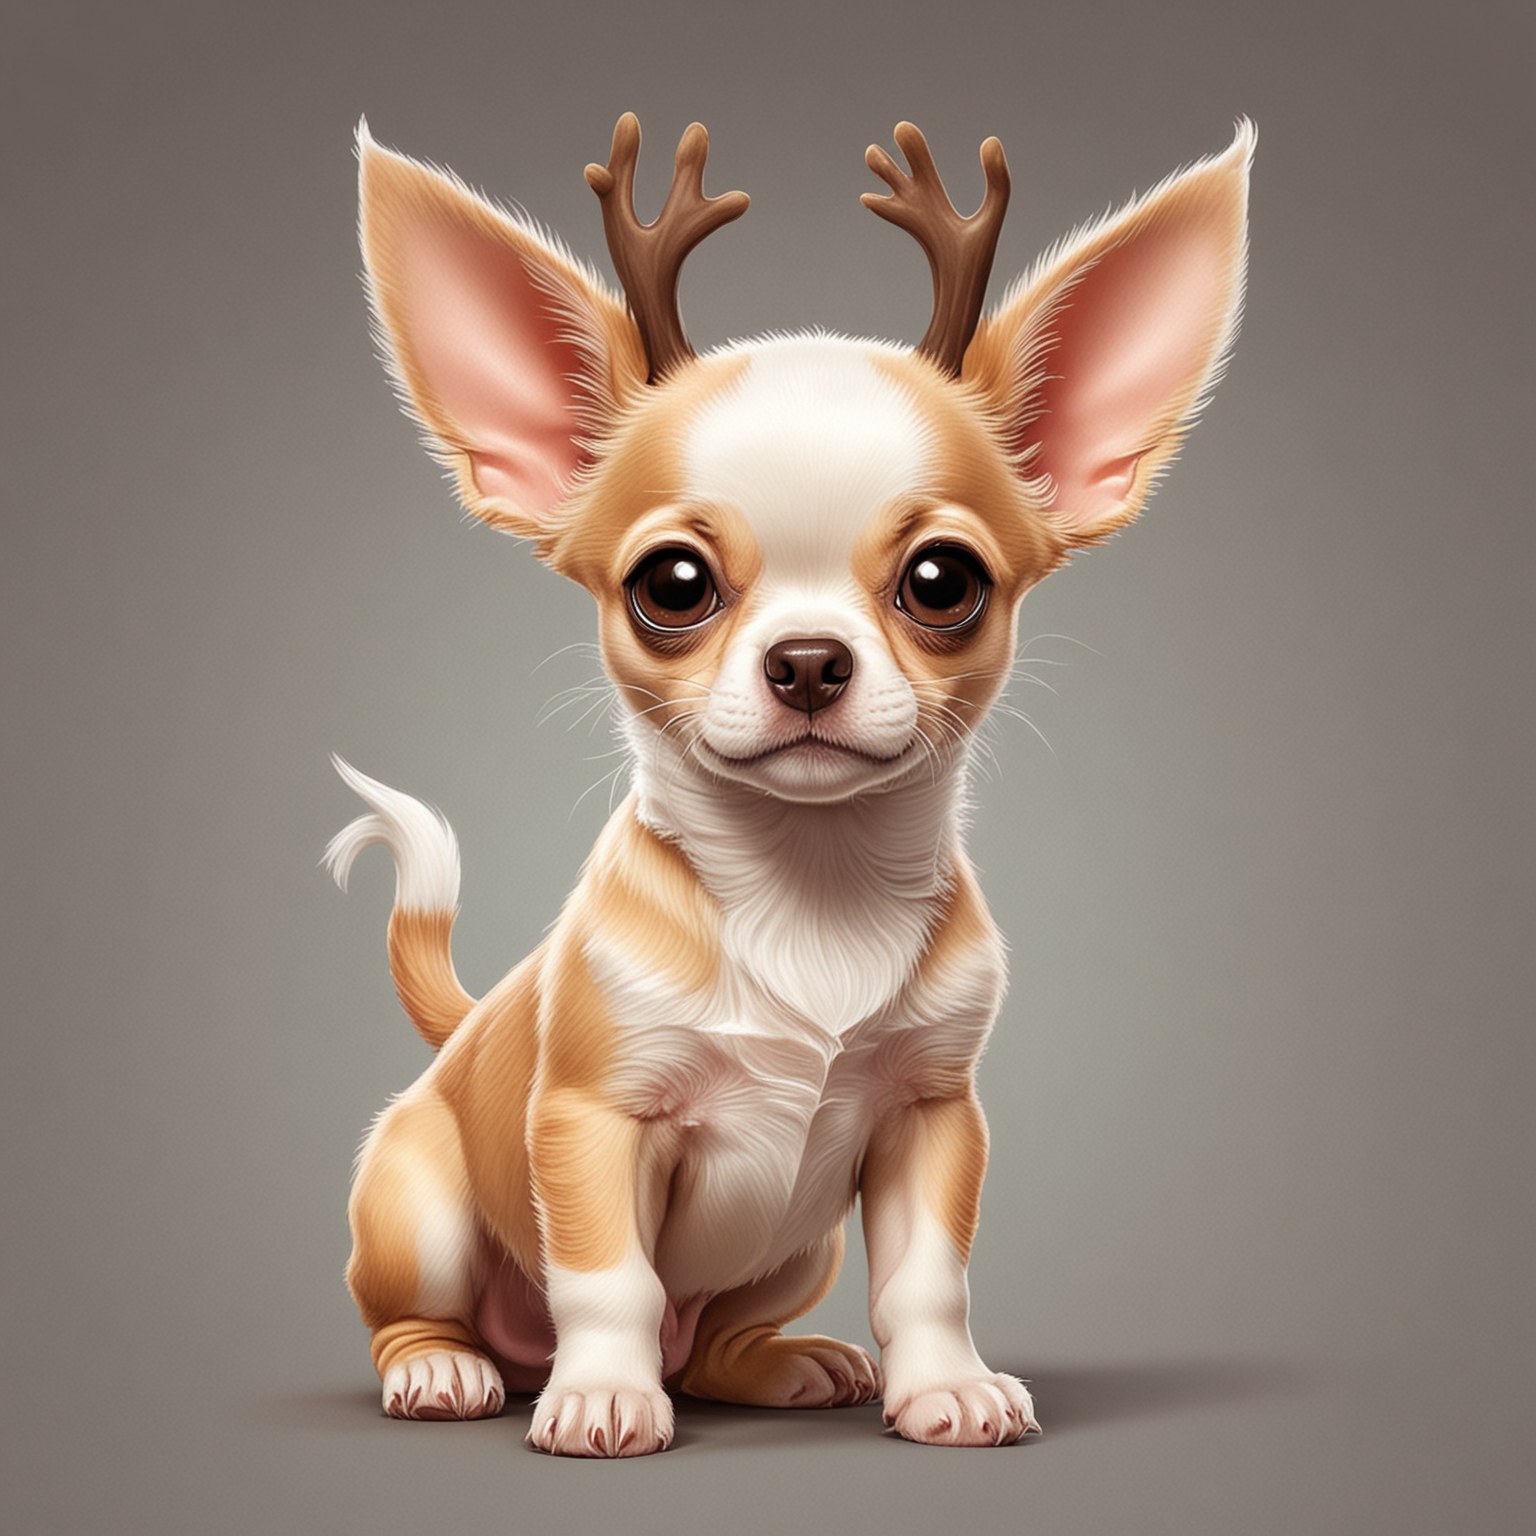 Adorable Cartoon Chihuahua Puppy with Deer Antlers and White Coat